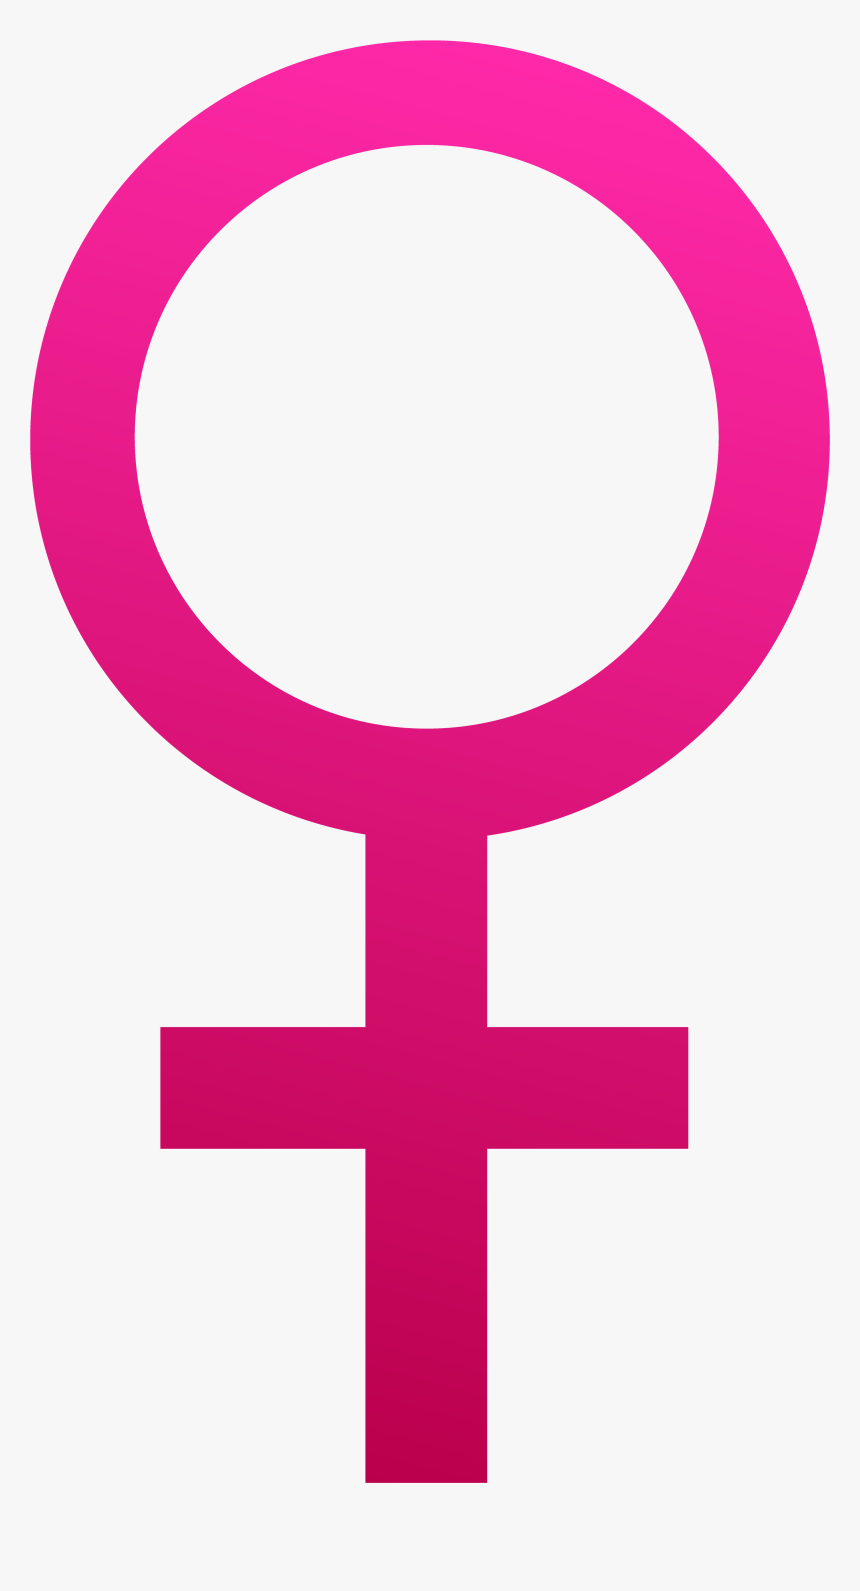 Venus Or Female Symbol - Percentage Of The World Is Female, HD Png Download, Free Download